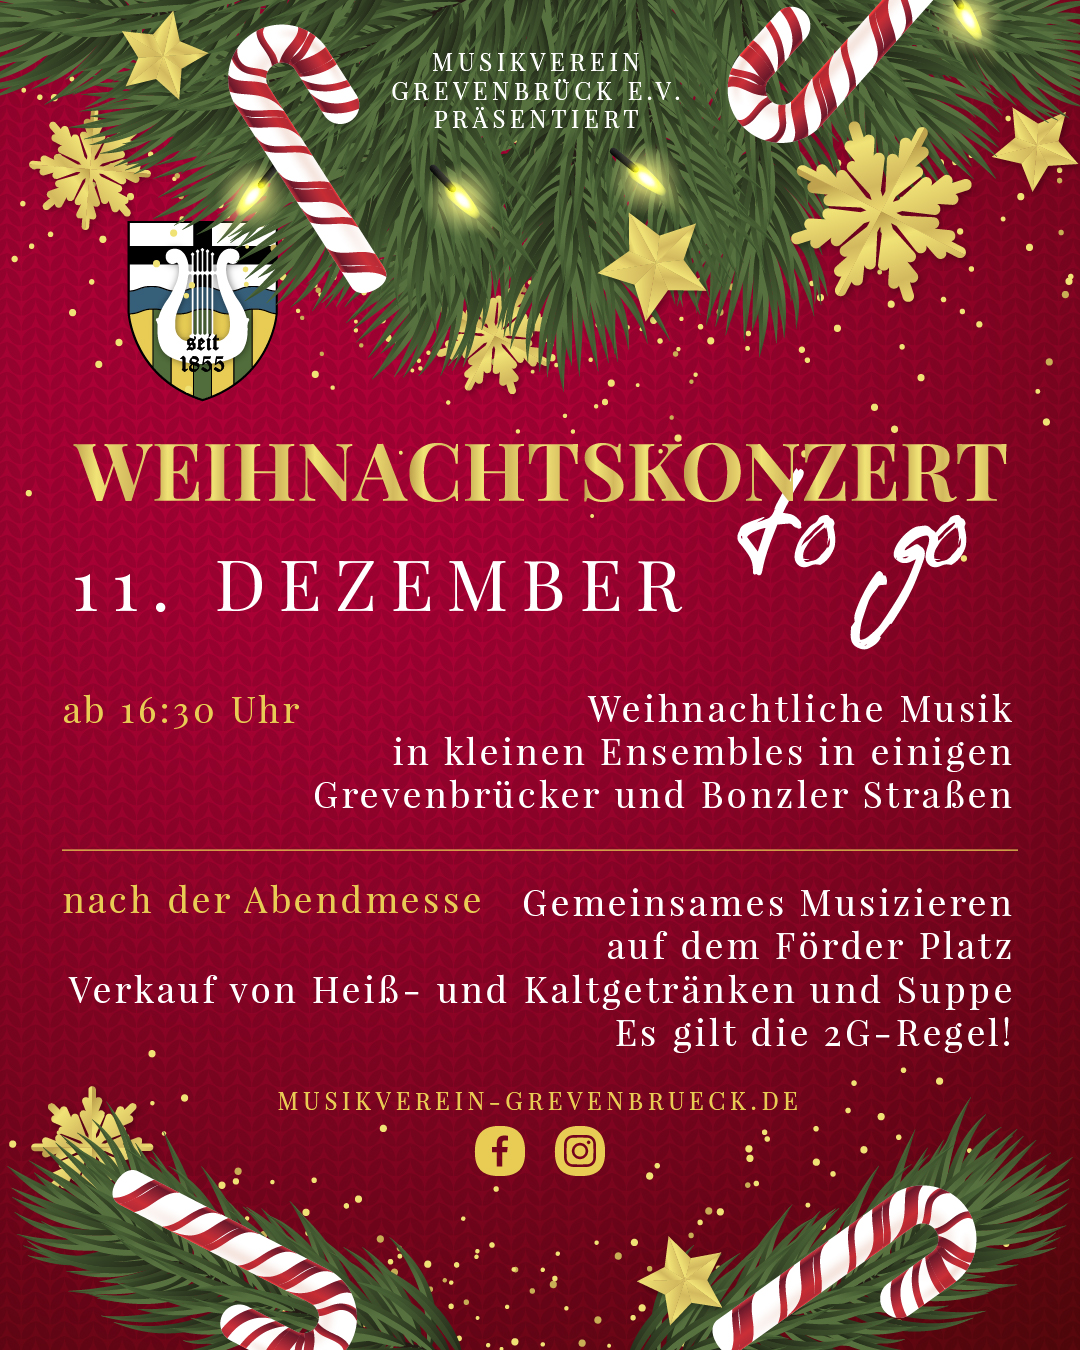 You are currently viewing Weihnachtskonzert to go